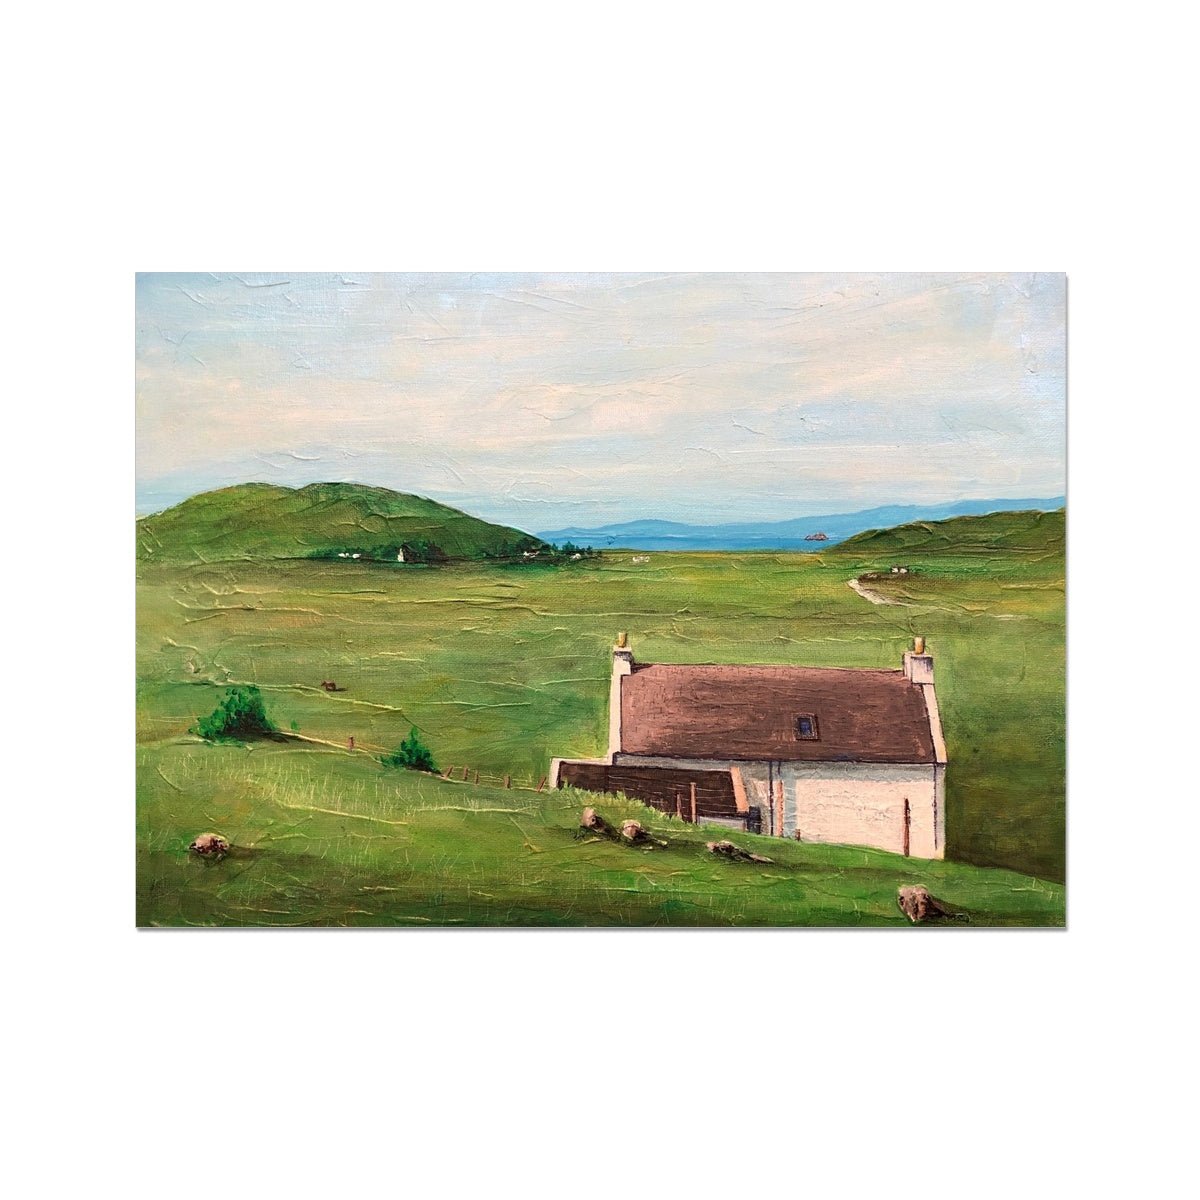 A Skye Cottage Painting | Fine Art Prints From Scotland-Unframed Prints-Skye Art Gallery-A2 Landscape-Paintings, Prints, Homeware, Art Gifts From Scotland By Scottish Artist Kevin Hunter